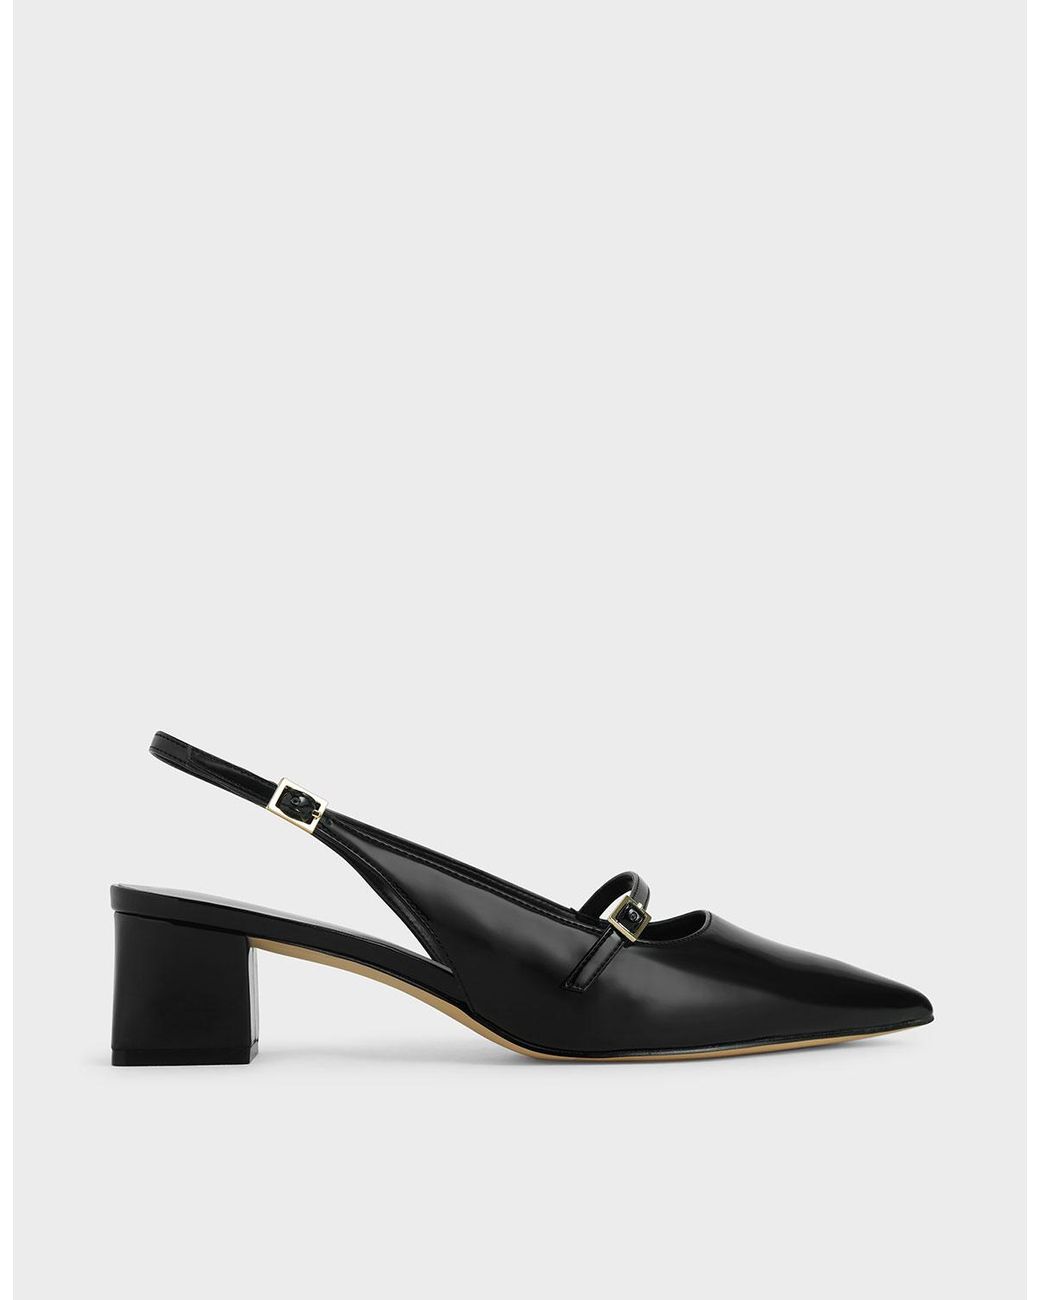 Charles & Keith Patent Mary Jane Slingback Pumps in Black - Lyst